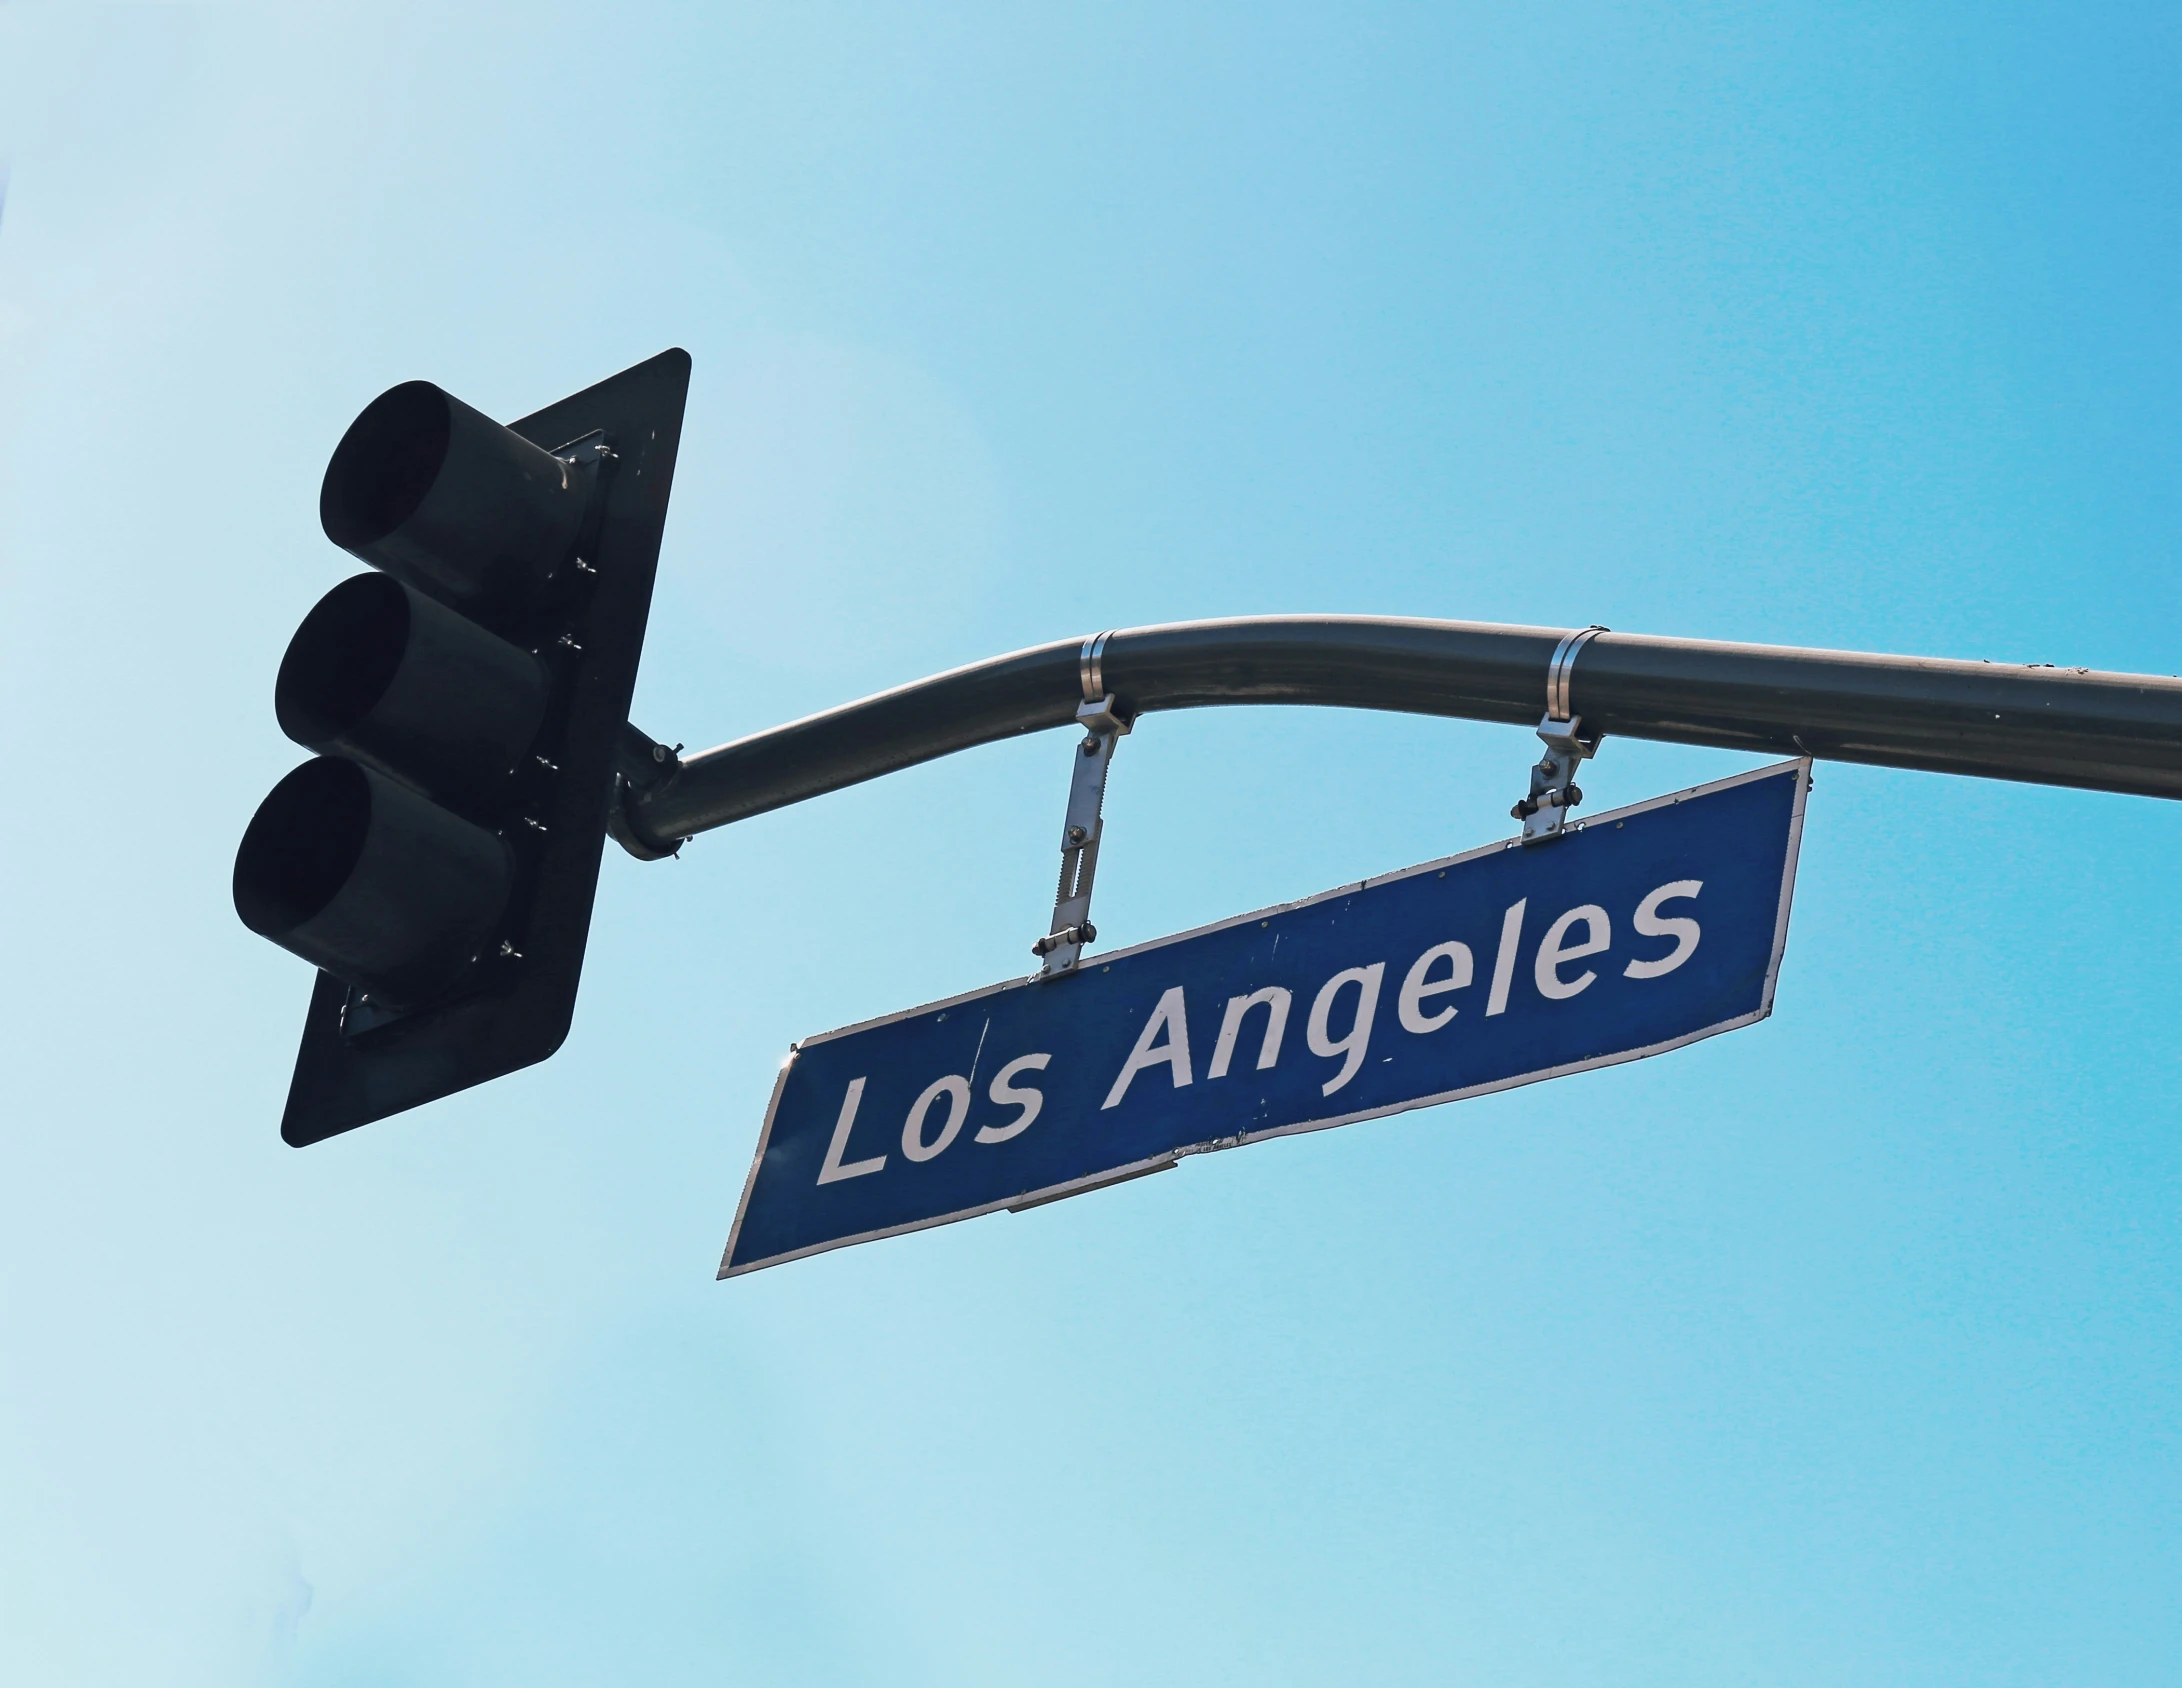 the street sign for los angeles under a traffic light